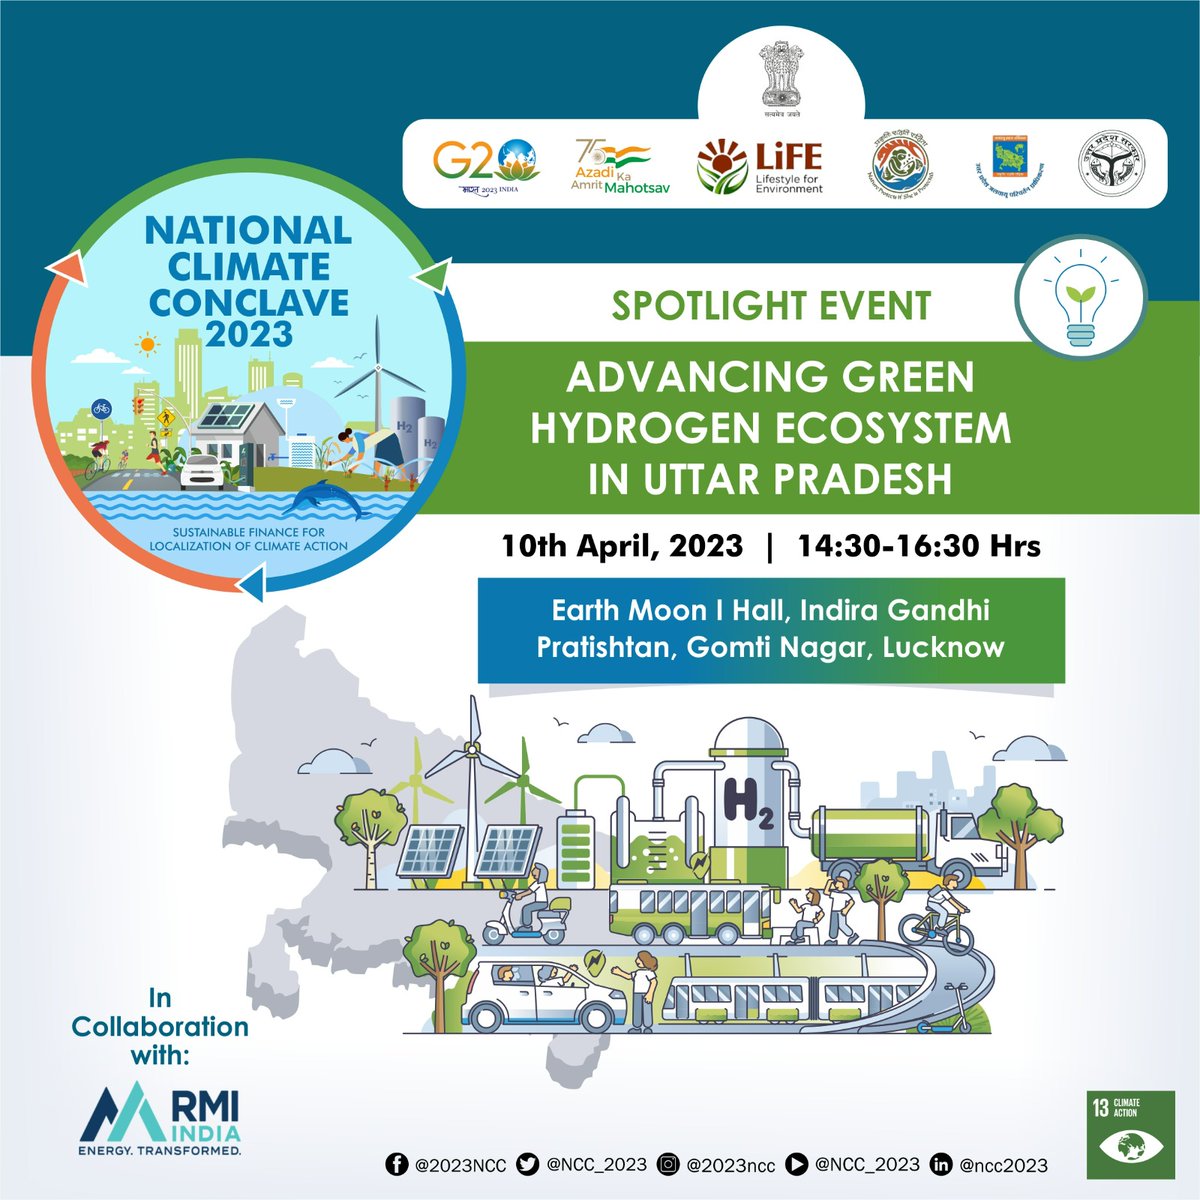 1/2) Green hydrogen is emerging as the future of clean energy, and states are eager to capitalise on the opportunities it presents for energy security and sustainability. As an early adopter, Uttar Pradesh leads the way in this transition. Join us for the spotlight event...